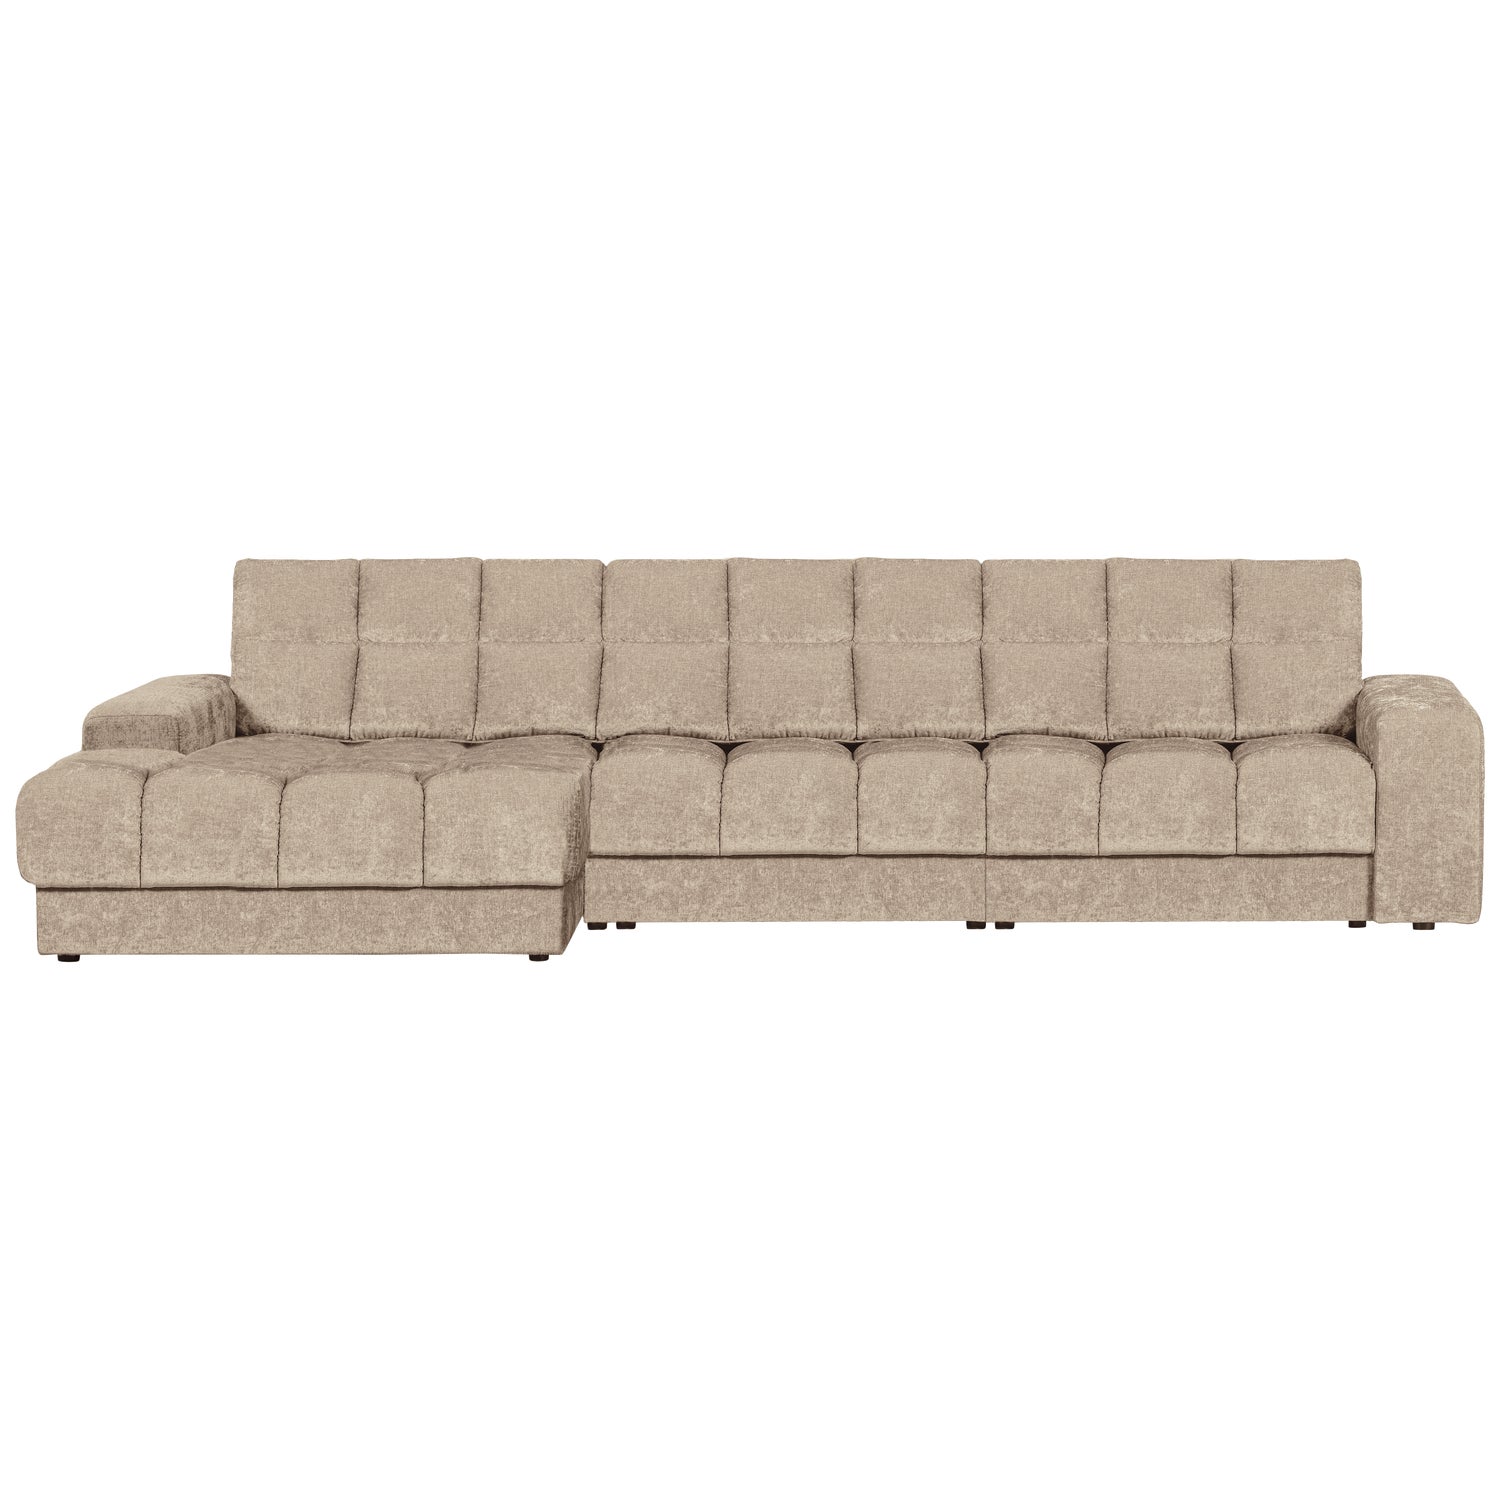 379012-N-01_VS_WE_Second_date_chaise_longue_links_vintage_nougat.png?auto=webp&format=png&width=1500&height=1500